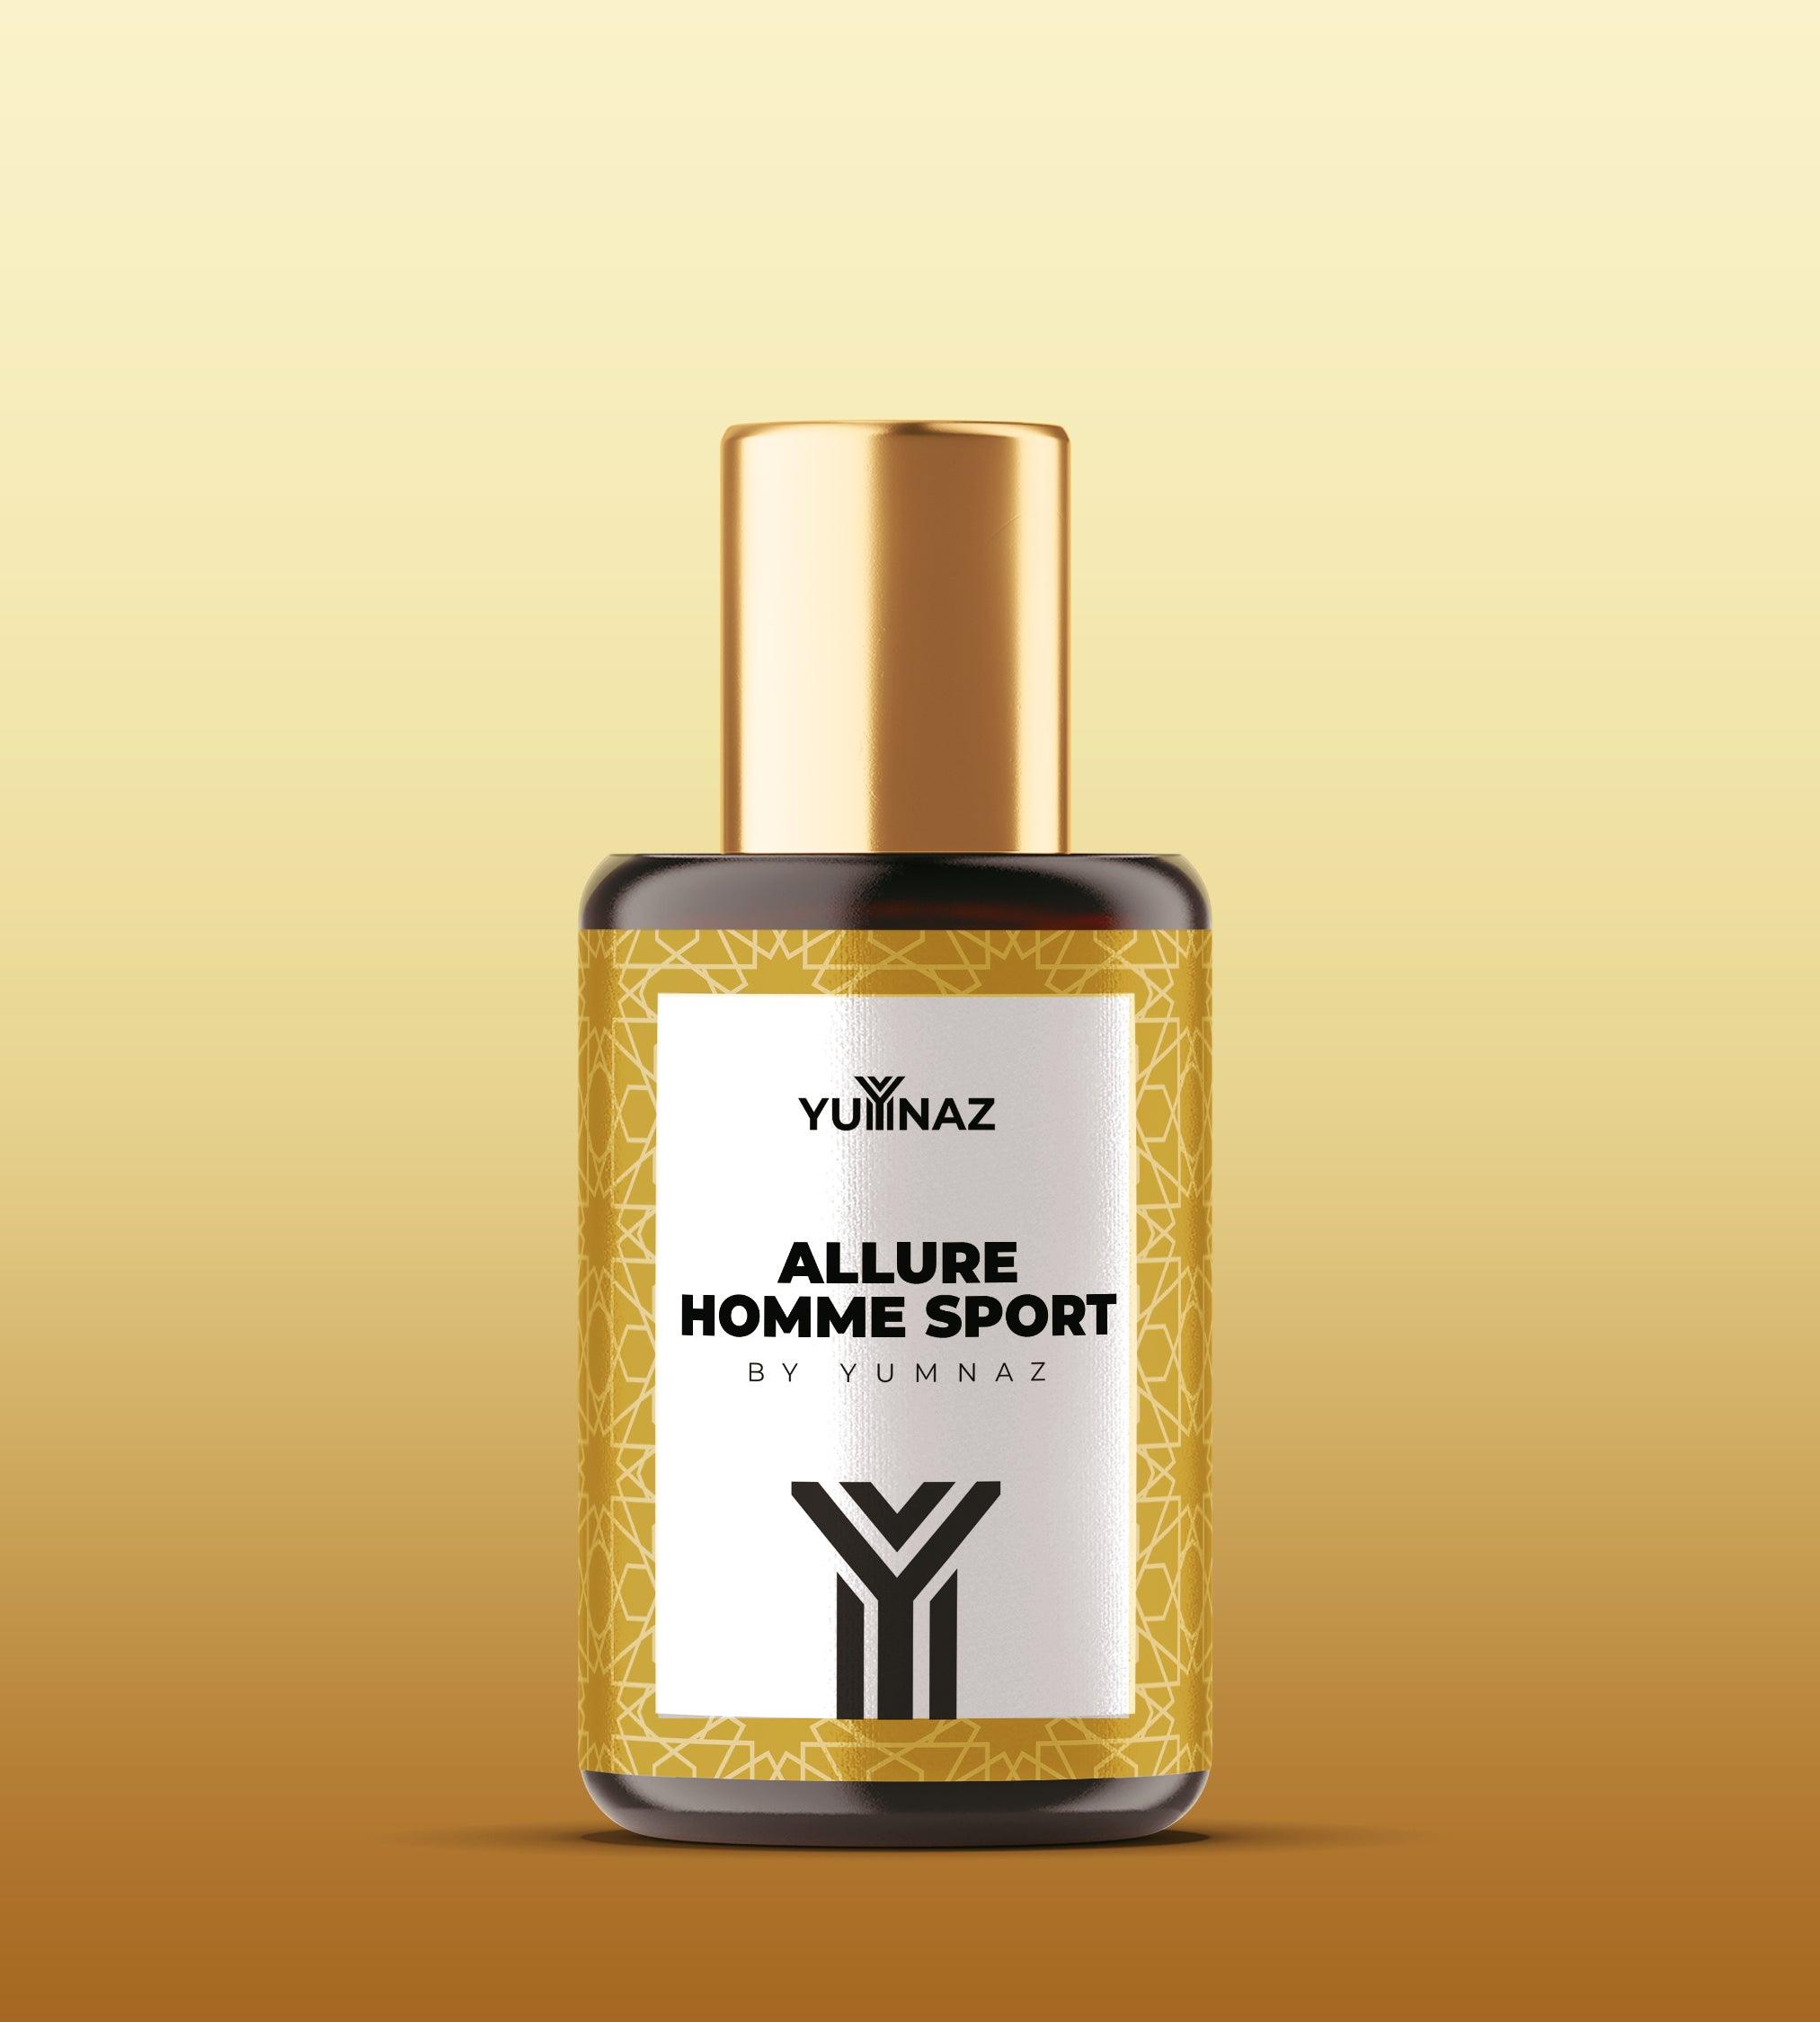 Get the Allure Homme Sport Perfume on a discounted Price in Pakistan - yumnaz